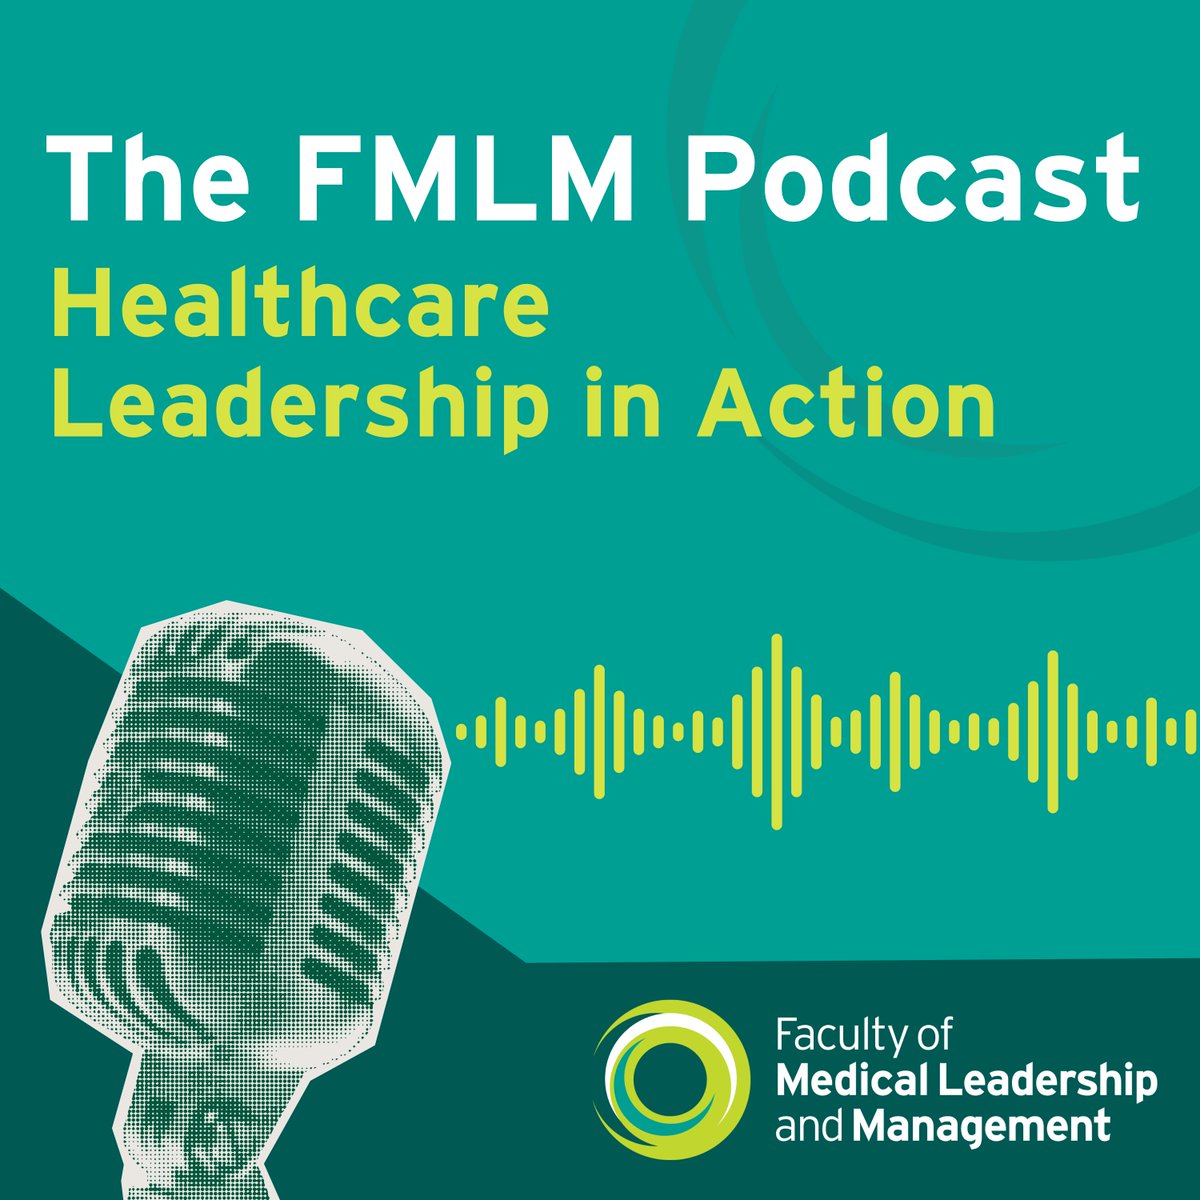 Pleased to announce new @FMLM_UK podcast series 'Healthcare Leadership in Action'. In 6 episodes, national thought-leaders explore how good leadership and management practices improve patient care, organizational efficiency & professional growth. Details: fmlm.ac.uk/the-fmlm-podca…